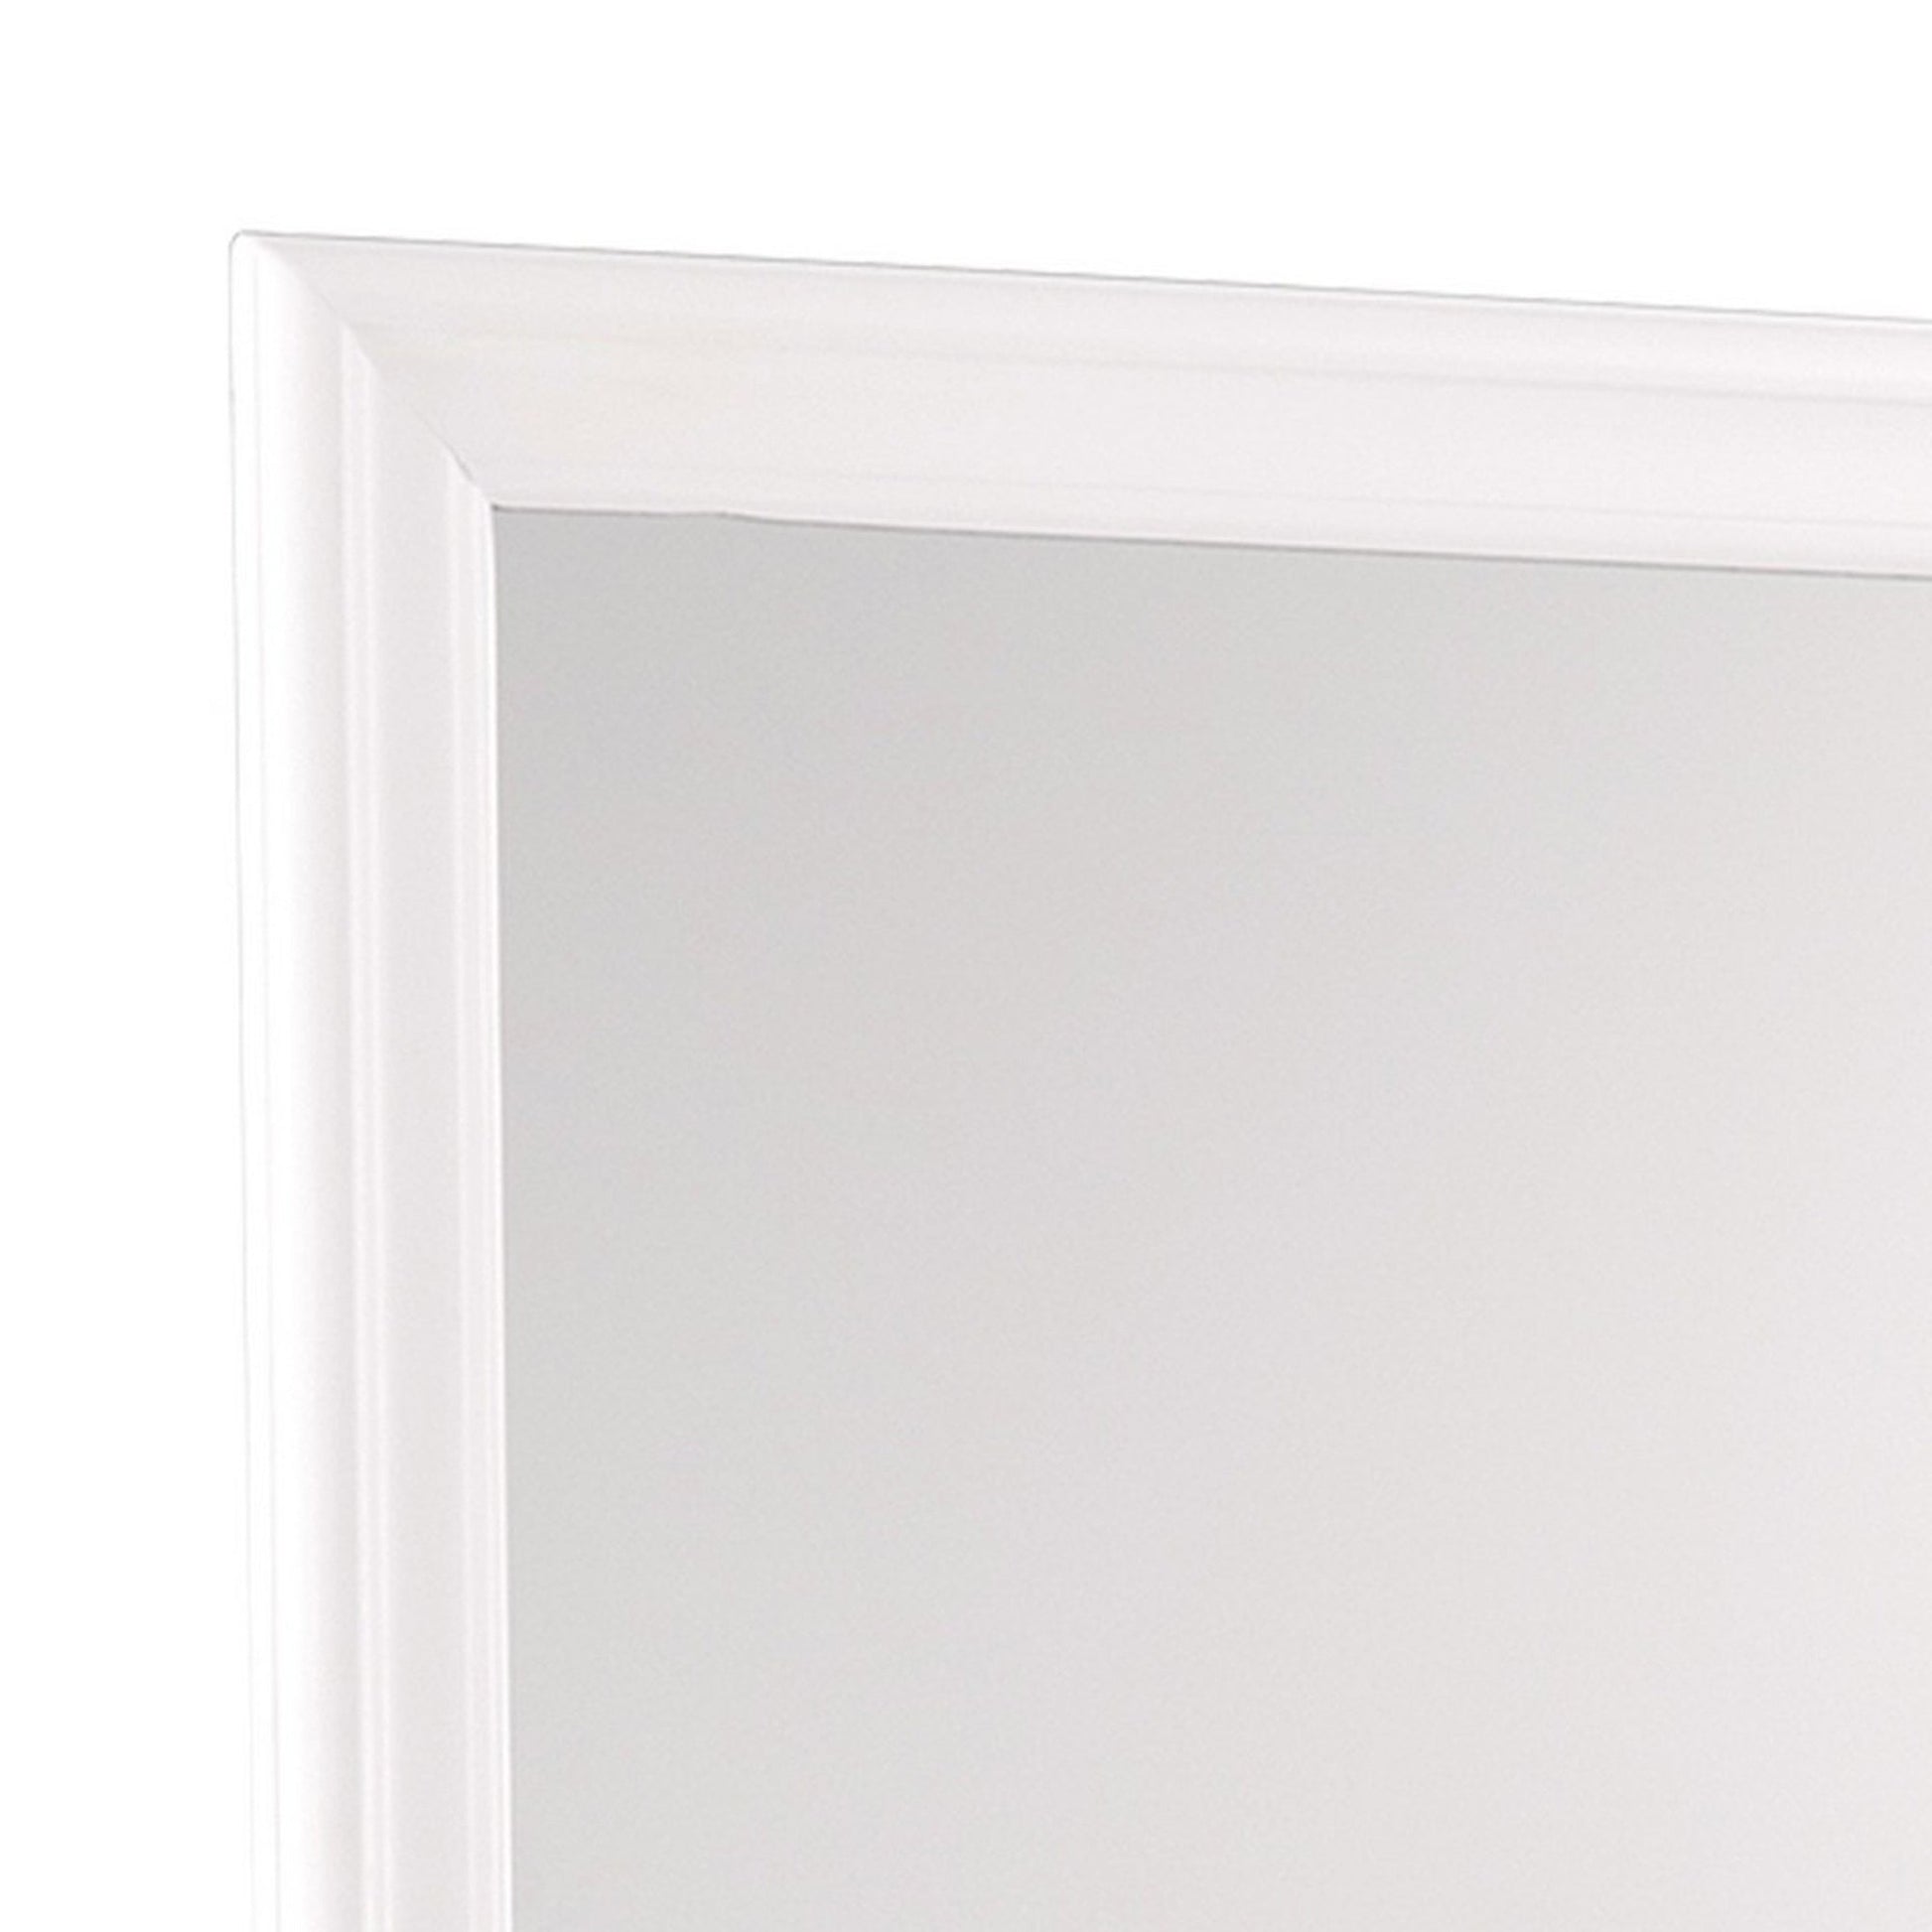 Benzara White Transitional Square Mirror With Wooden Encasing and Convex Edges